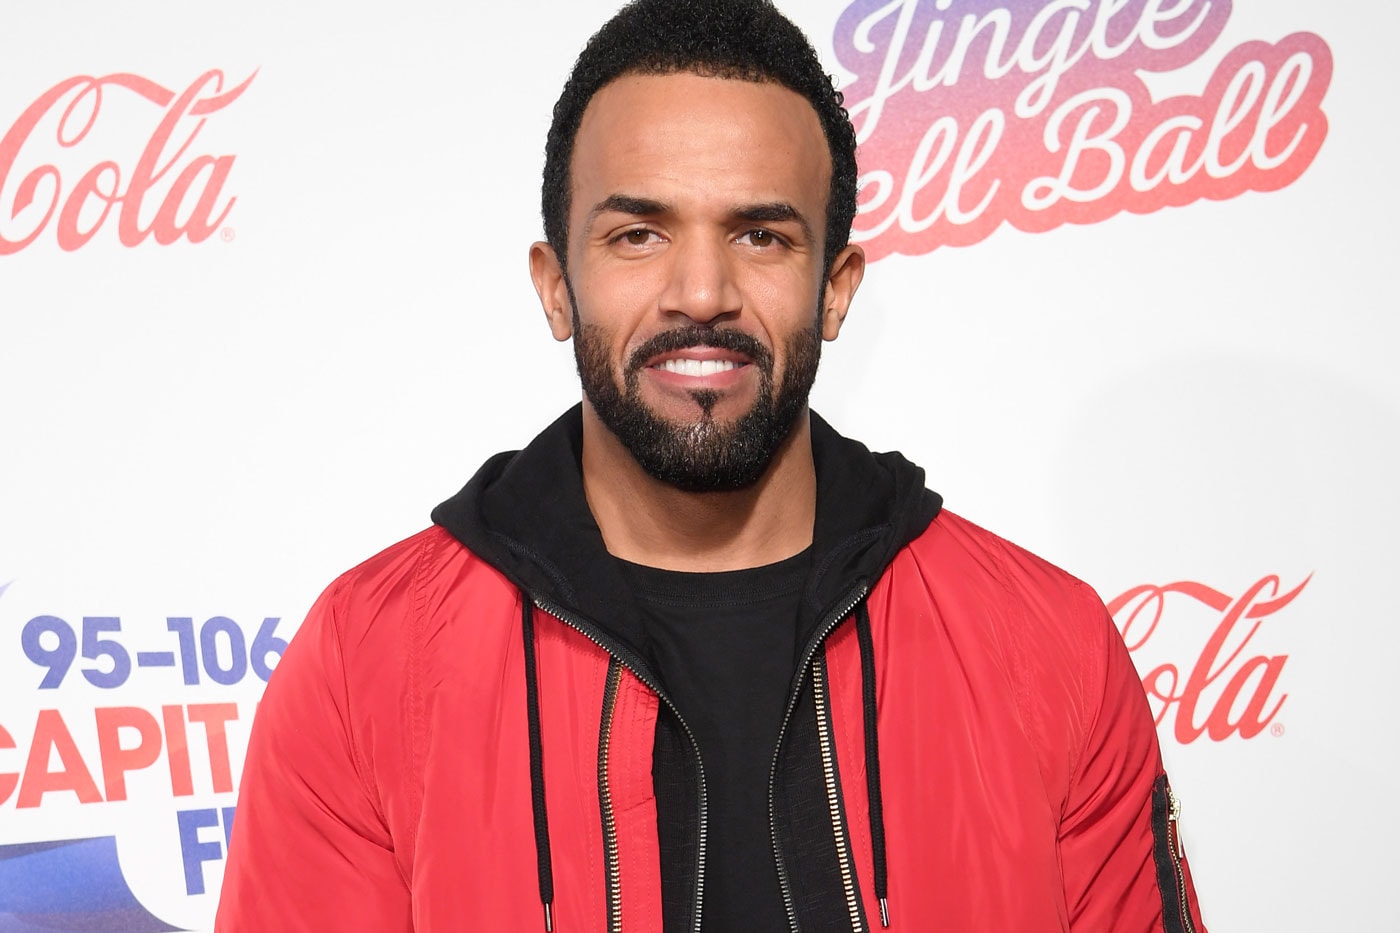 Craig David & Sigala Unveil Video for New Single "Ain't Giving Up"